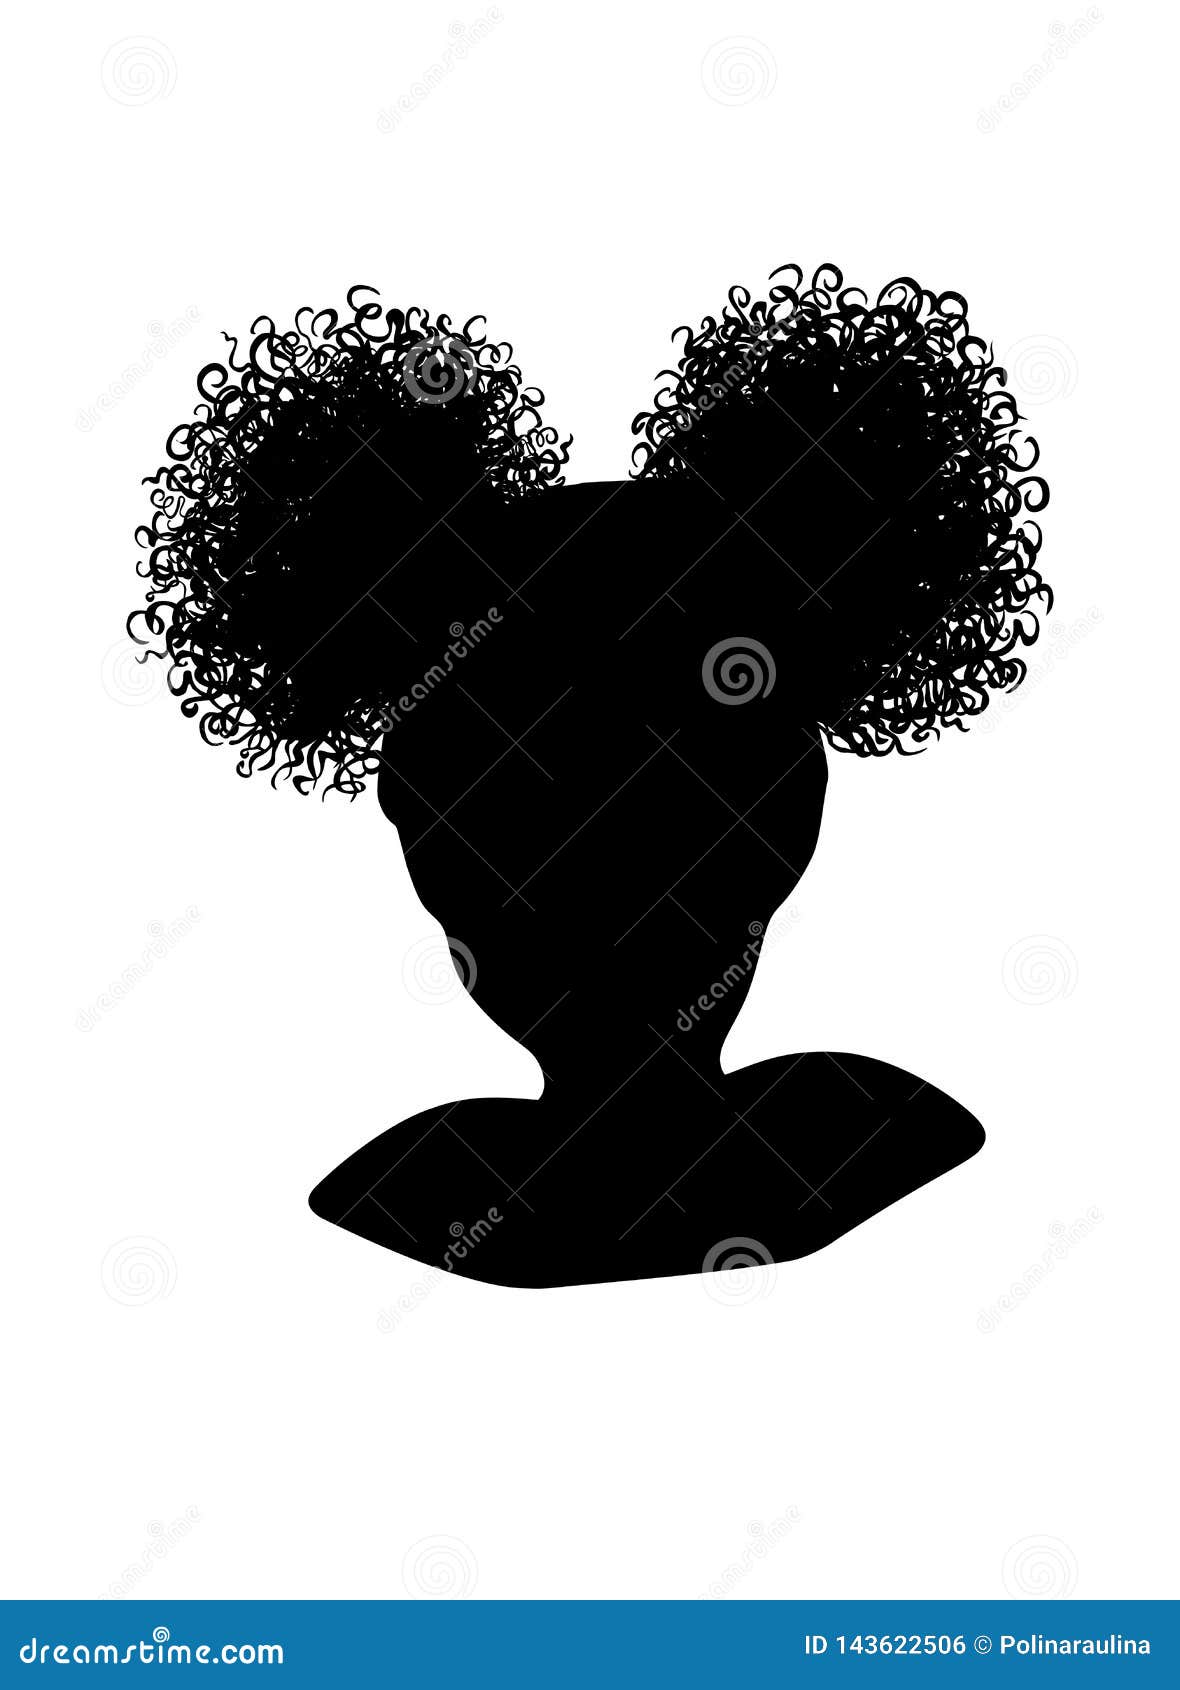 Download Little Black African American Girl Head With Curly Pony Tail Puffs Cricut Vector Silhouette Illustration Stock Photo Illustration Of Diversity Child 143622506